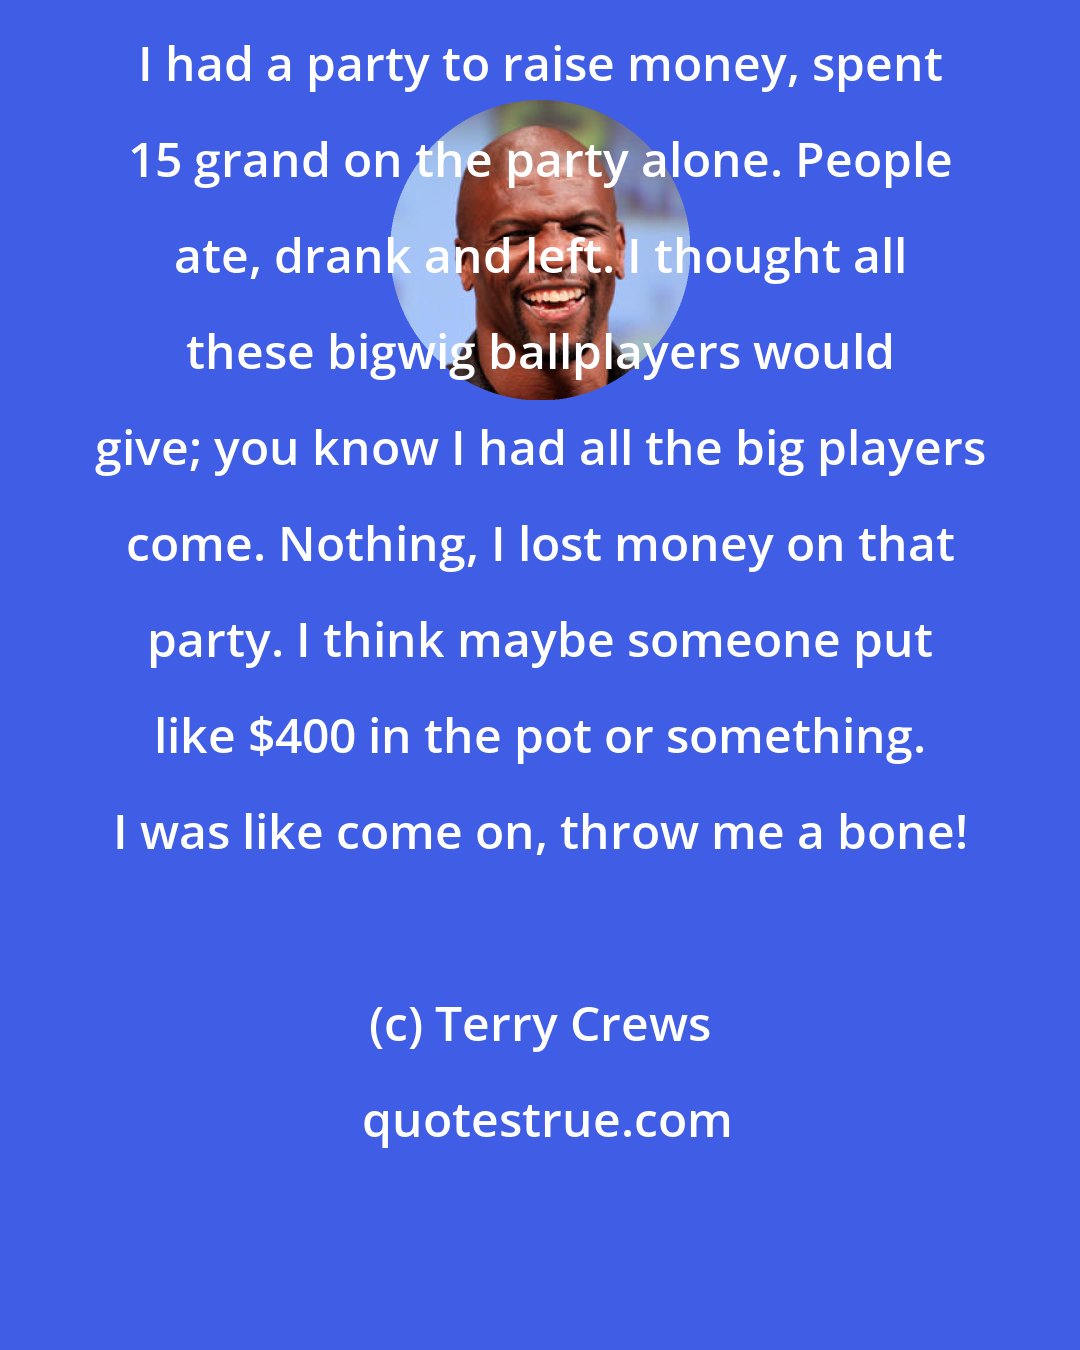 Terry Crews: I had a party to raise money, spent 15 grand on the party alone. People ate, drank and left. I thought all these bigwig ballplayers would give; you know I had all the big players come. Nothing, I lost money on that party. I think maybe someone put like $400 in the pot or something. I was like come on, throw me a bone!